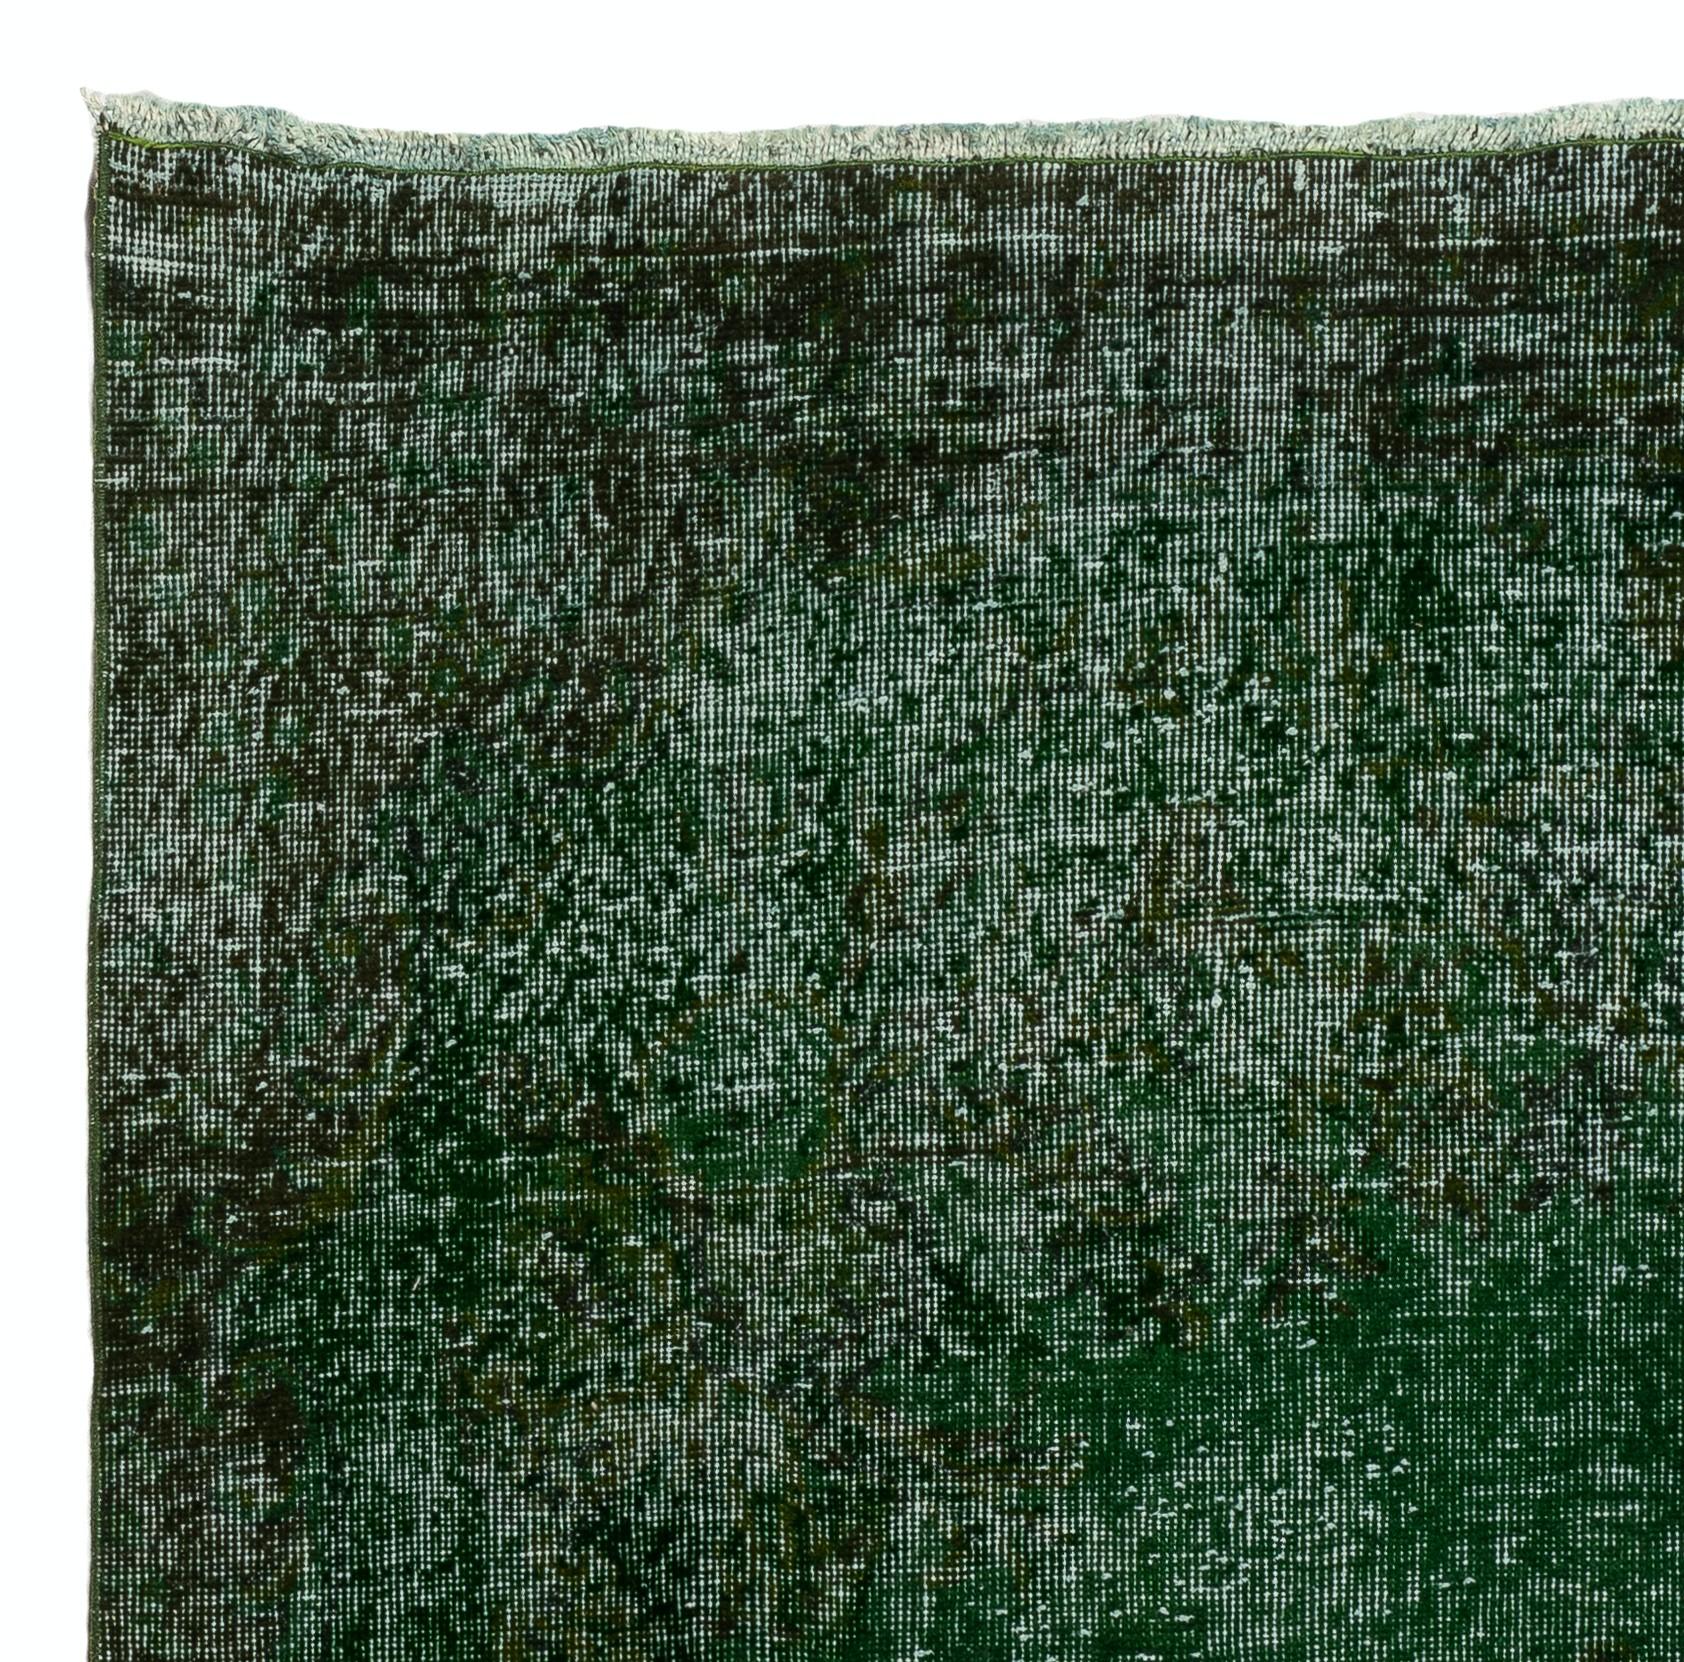 Turkish 6x11 Ft Distressed Vintage Handmade Rug in Green Color. Modern Anatolian Carpet For Sale